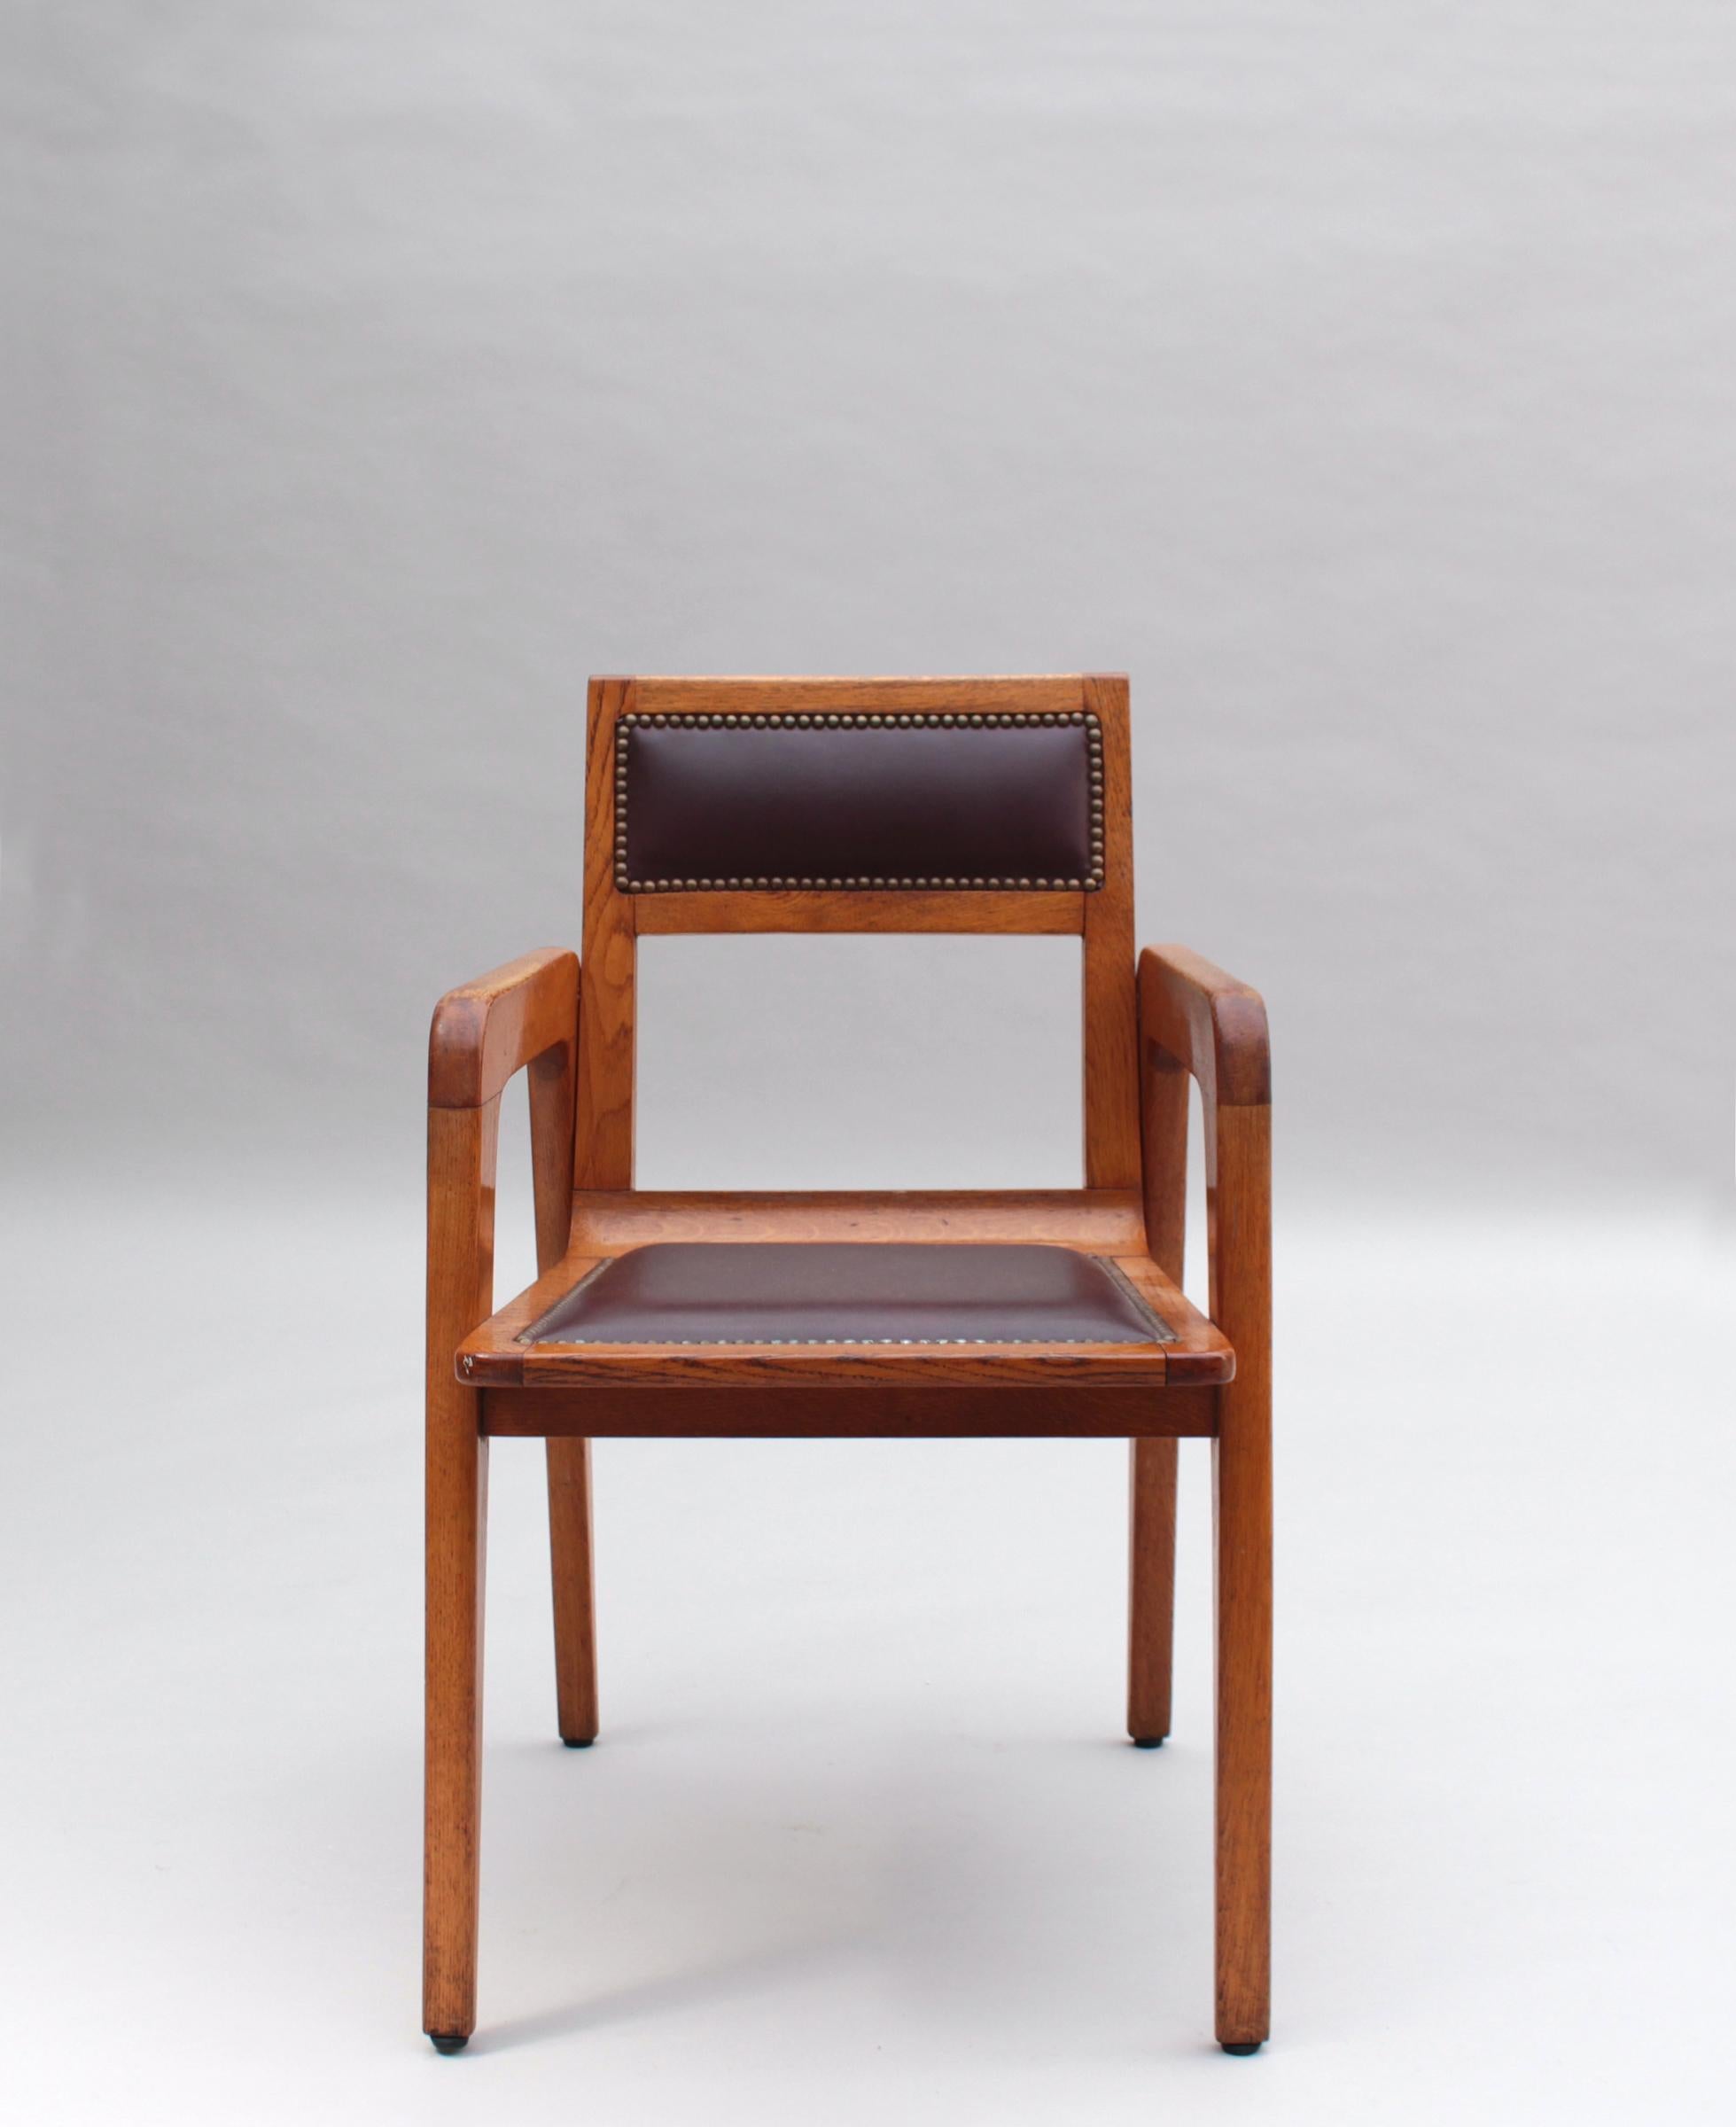 Twenty eight fine Belgian solid oak arm chairs by De Coene Freres for Knoll International LTD New-York.
To our knowledge, this rare model was commissioned for one project in Belgium.
One chair has the original label from Knoll.

Price is per chair.
